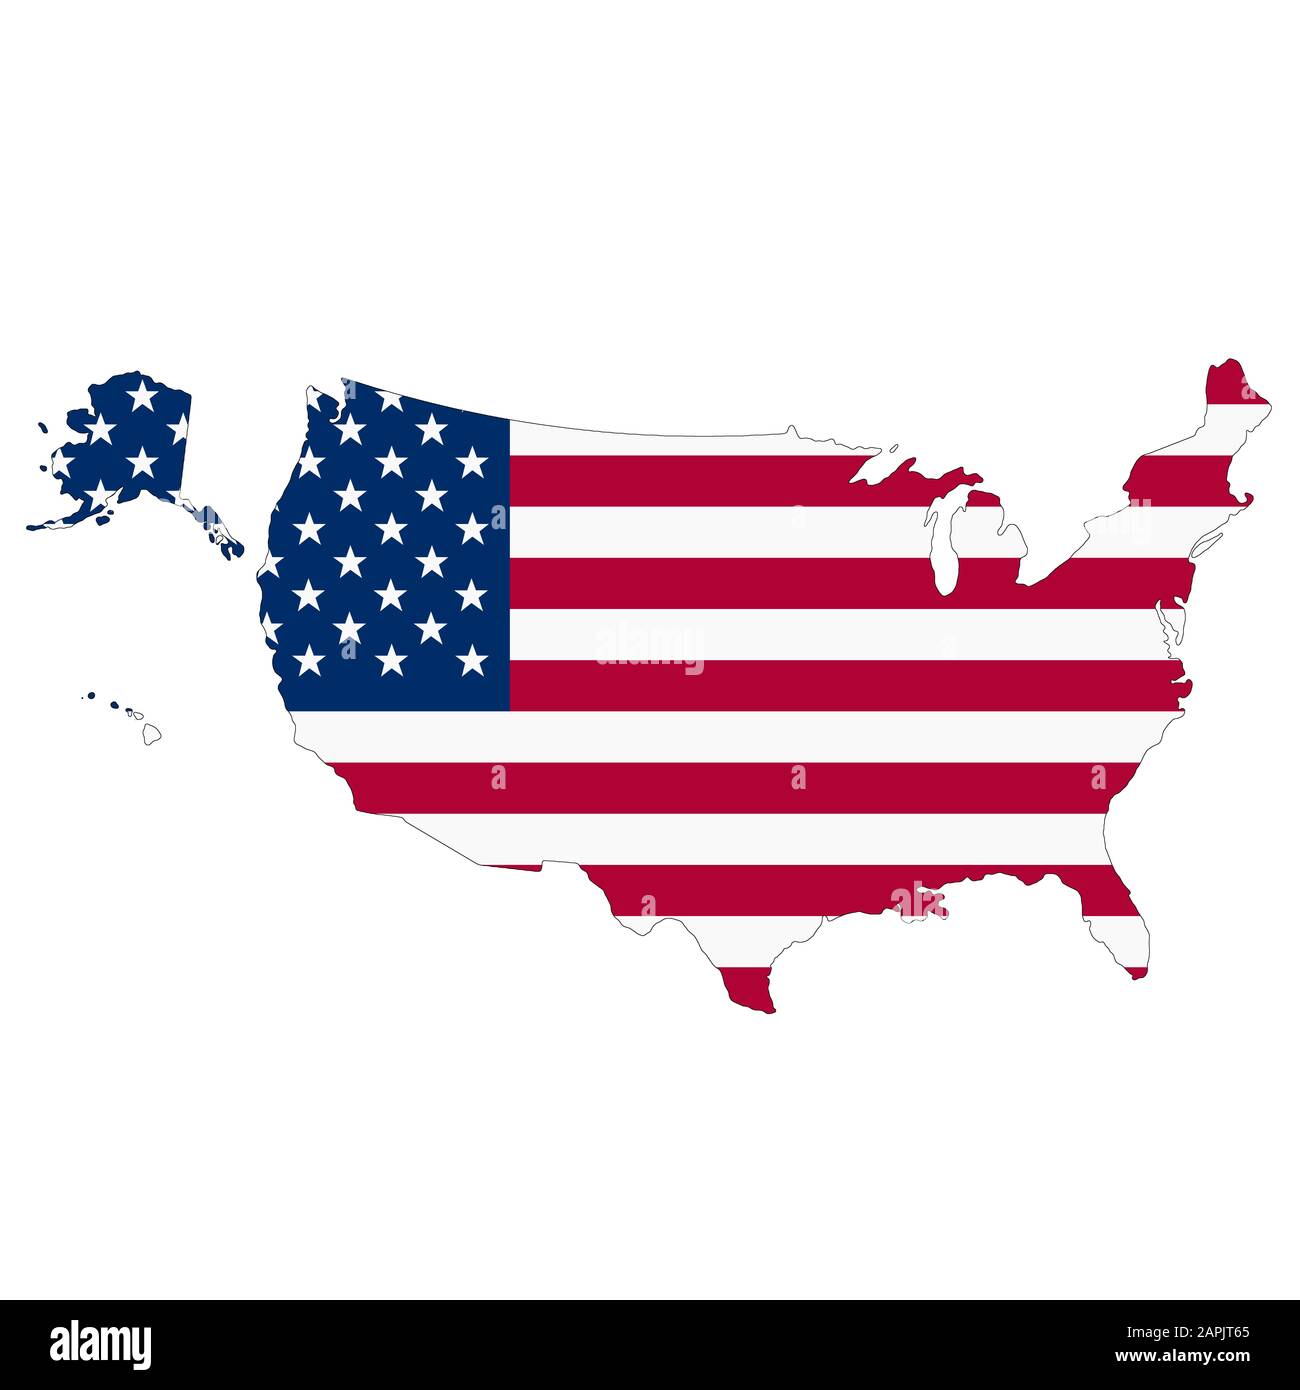 A United States of America map on white background with clipping path Stock Photo